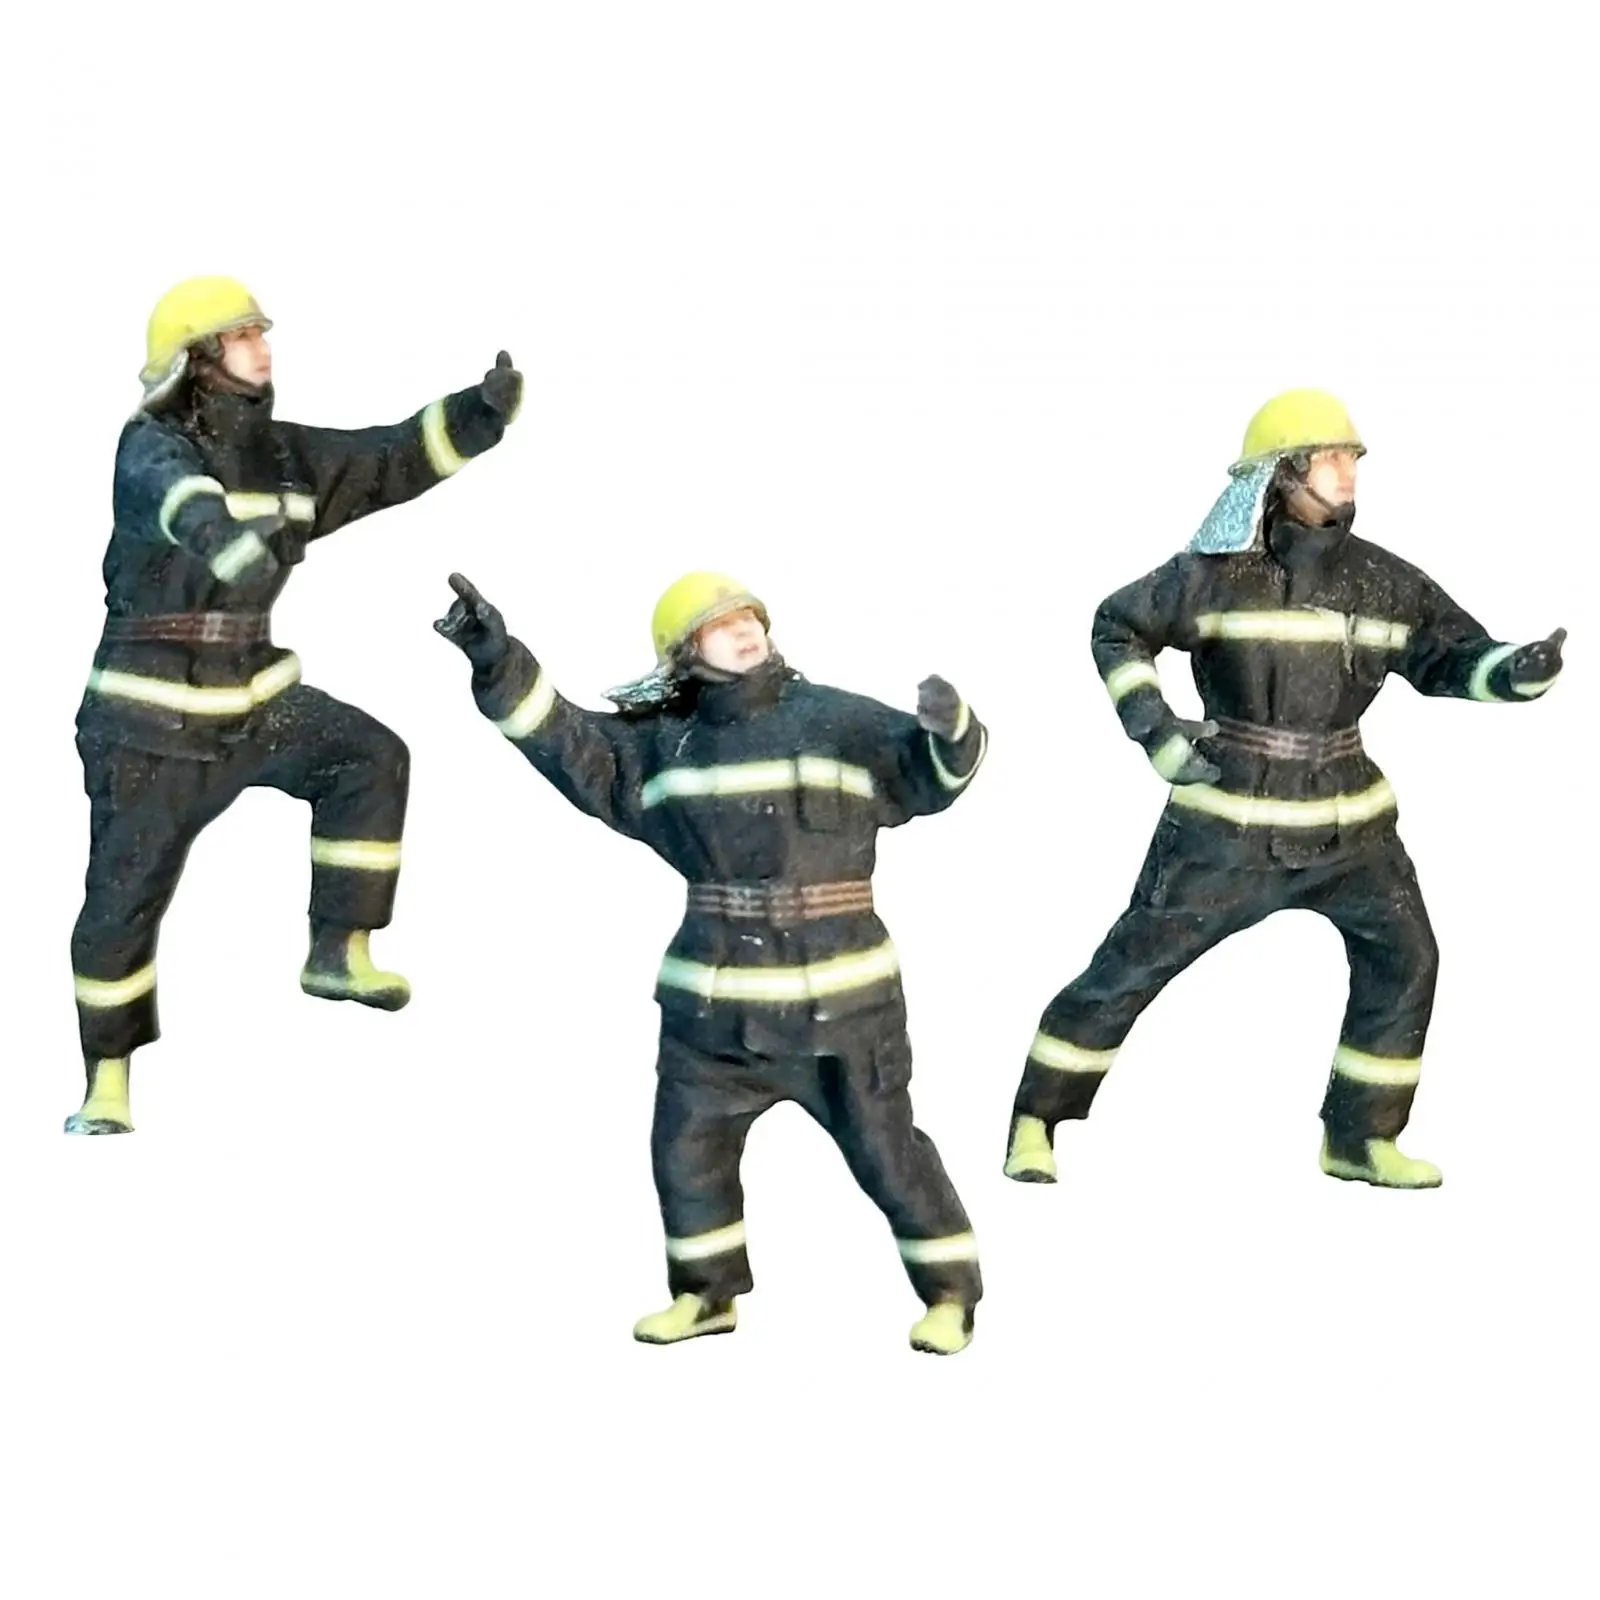 3Pcs Firefighter Model Hand Painted Pretend Play Tiny People Model for Miniature Scene Dollhouse Photography Props Decoration